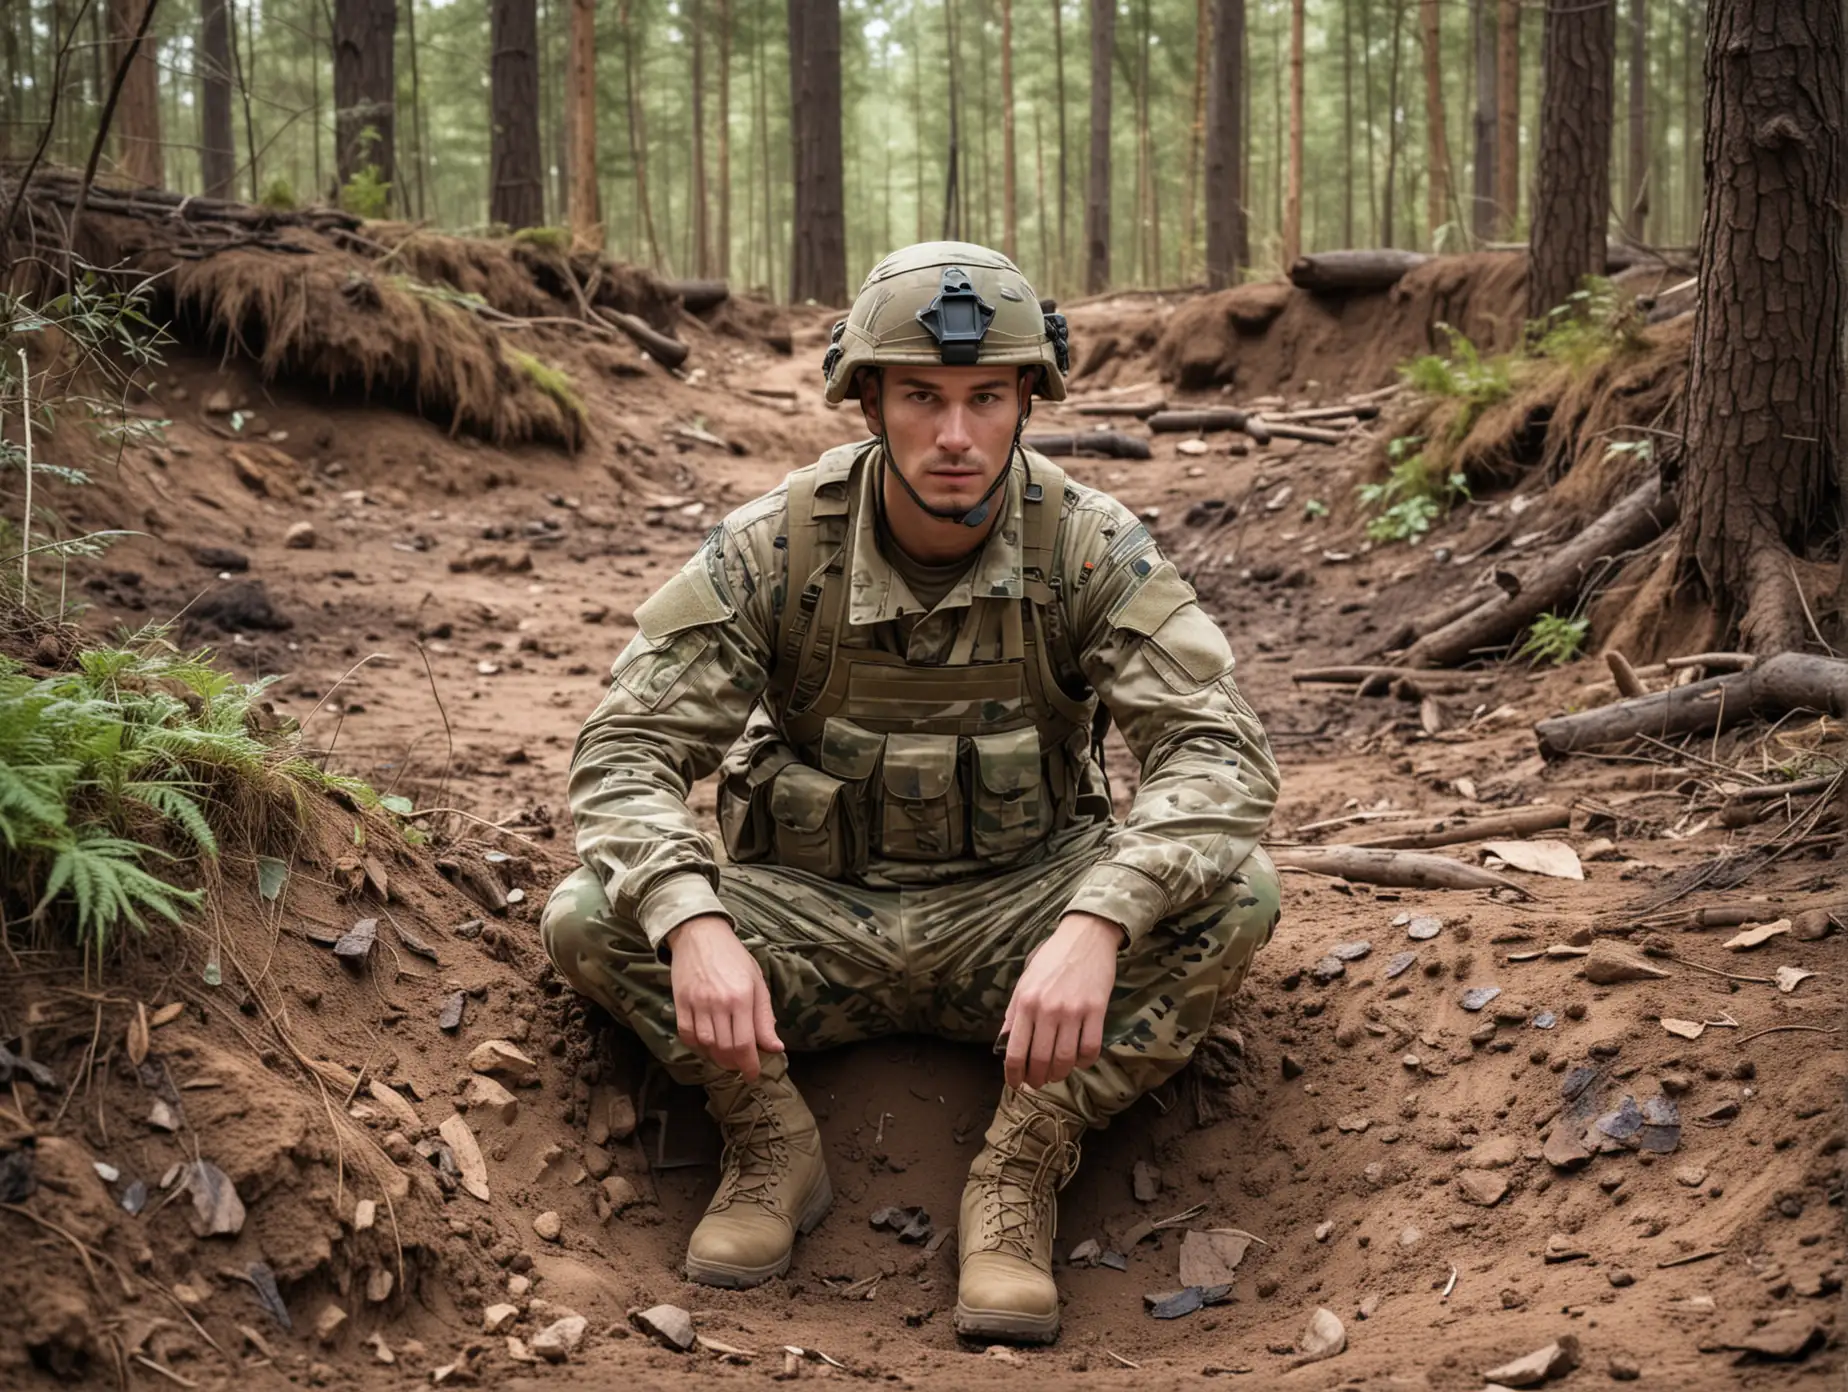 Modern Soldier Resting in Dense Forest Setting